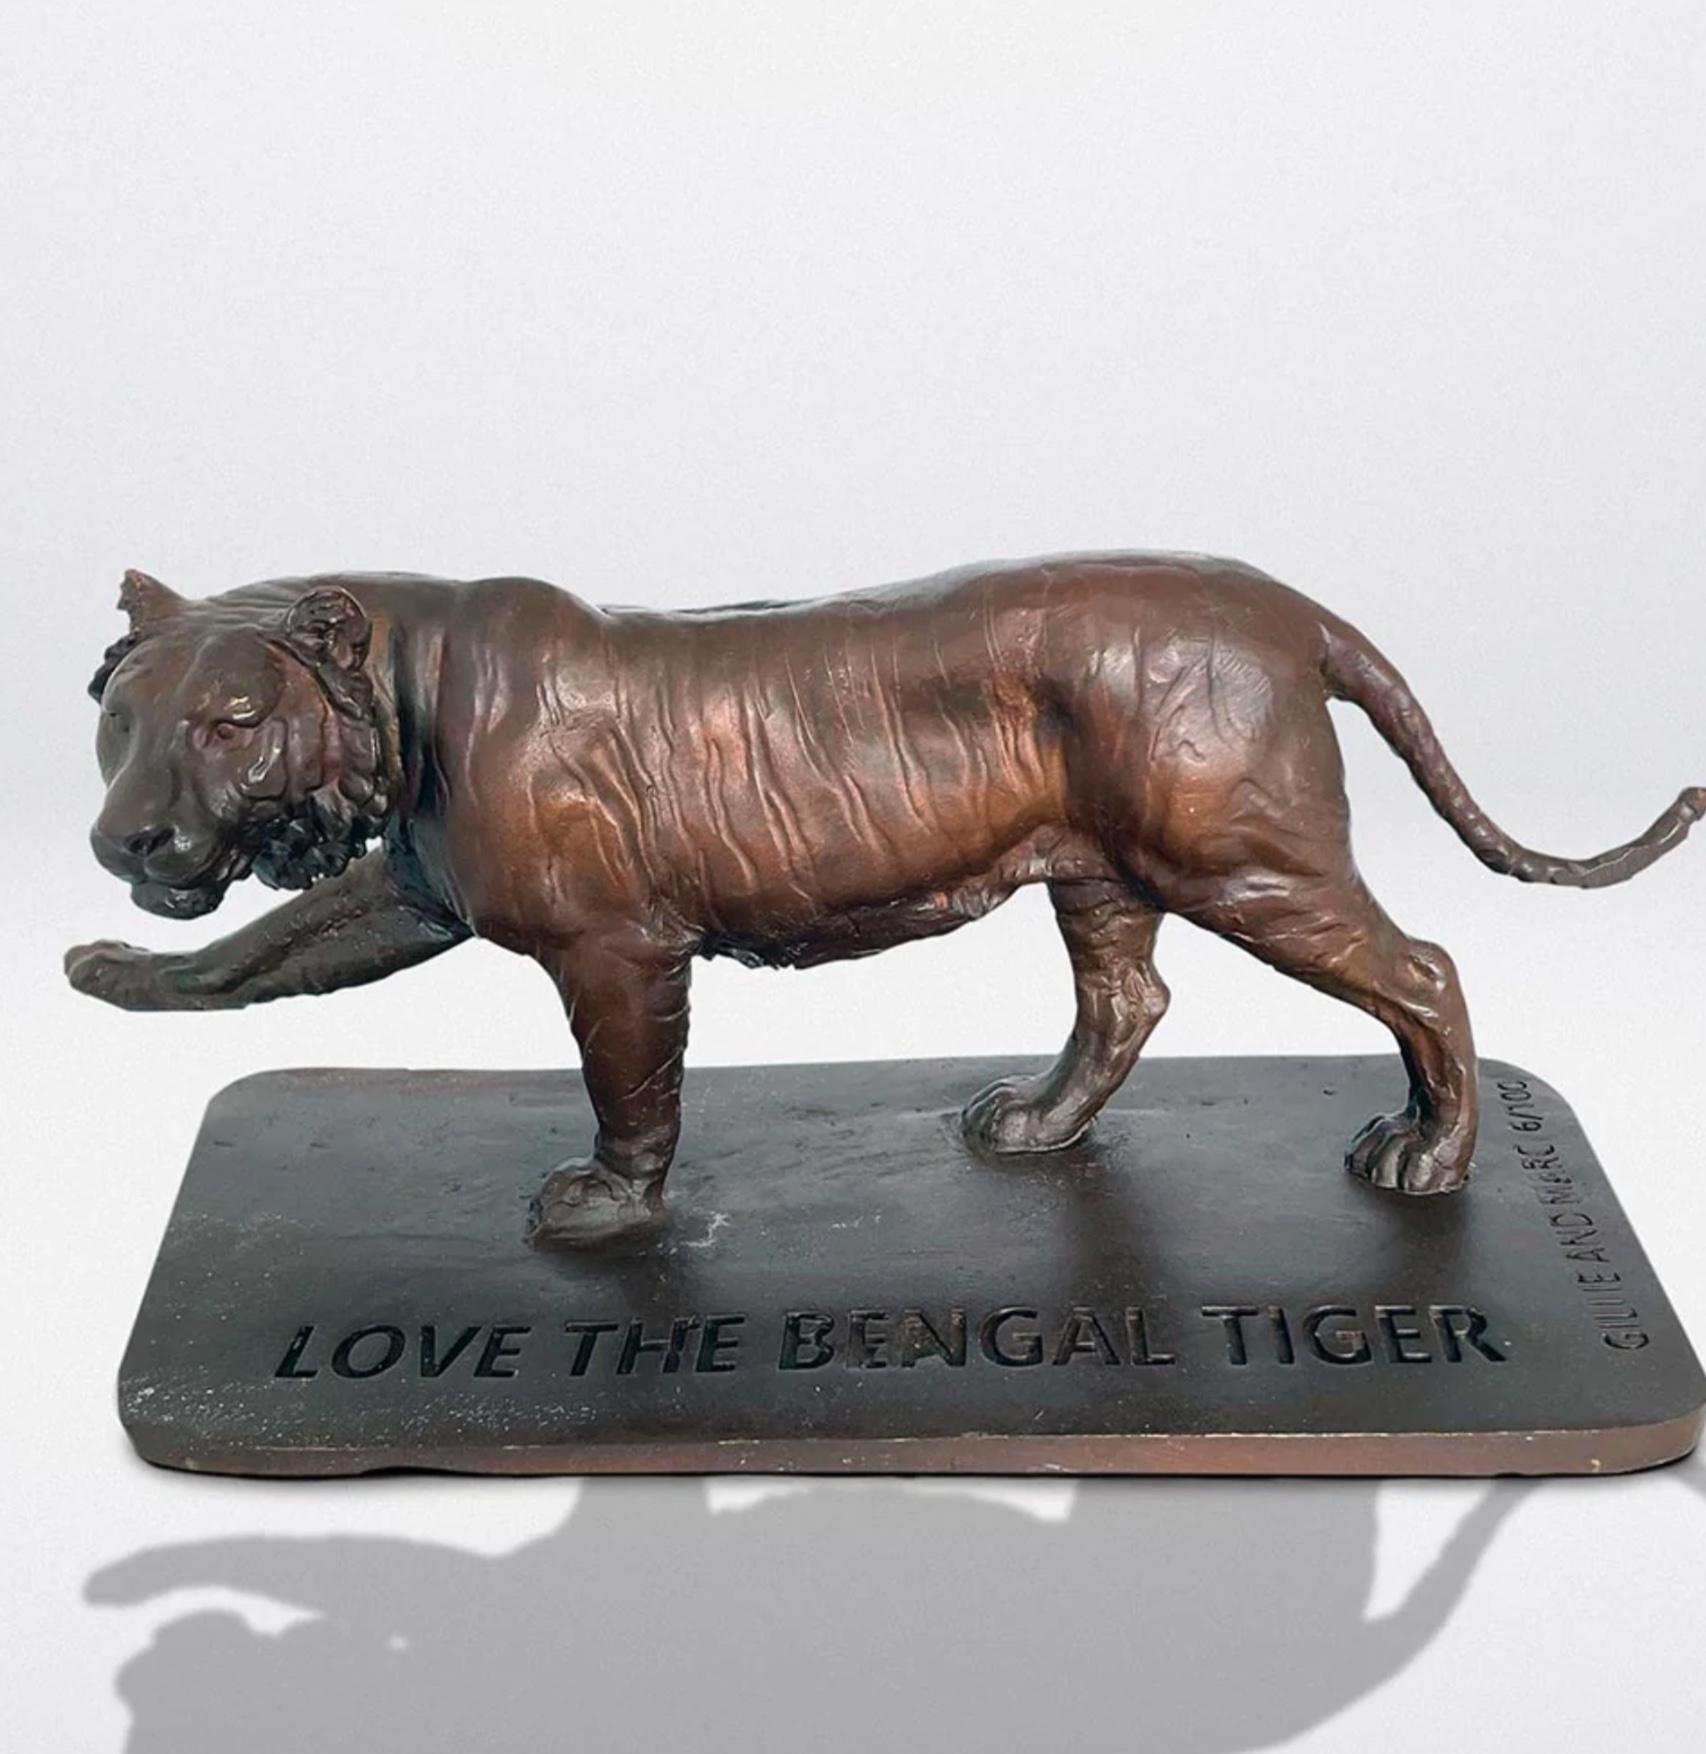 Authentic Bronze Love the Bengal Tiger Sculpture by Gillie and Marc - Art by Gillie and Marc Schattner